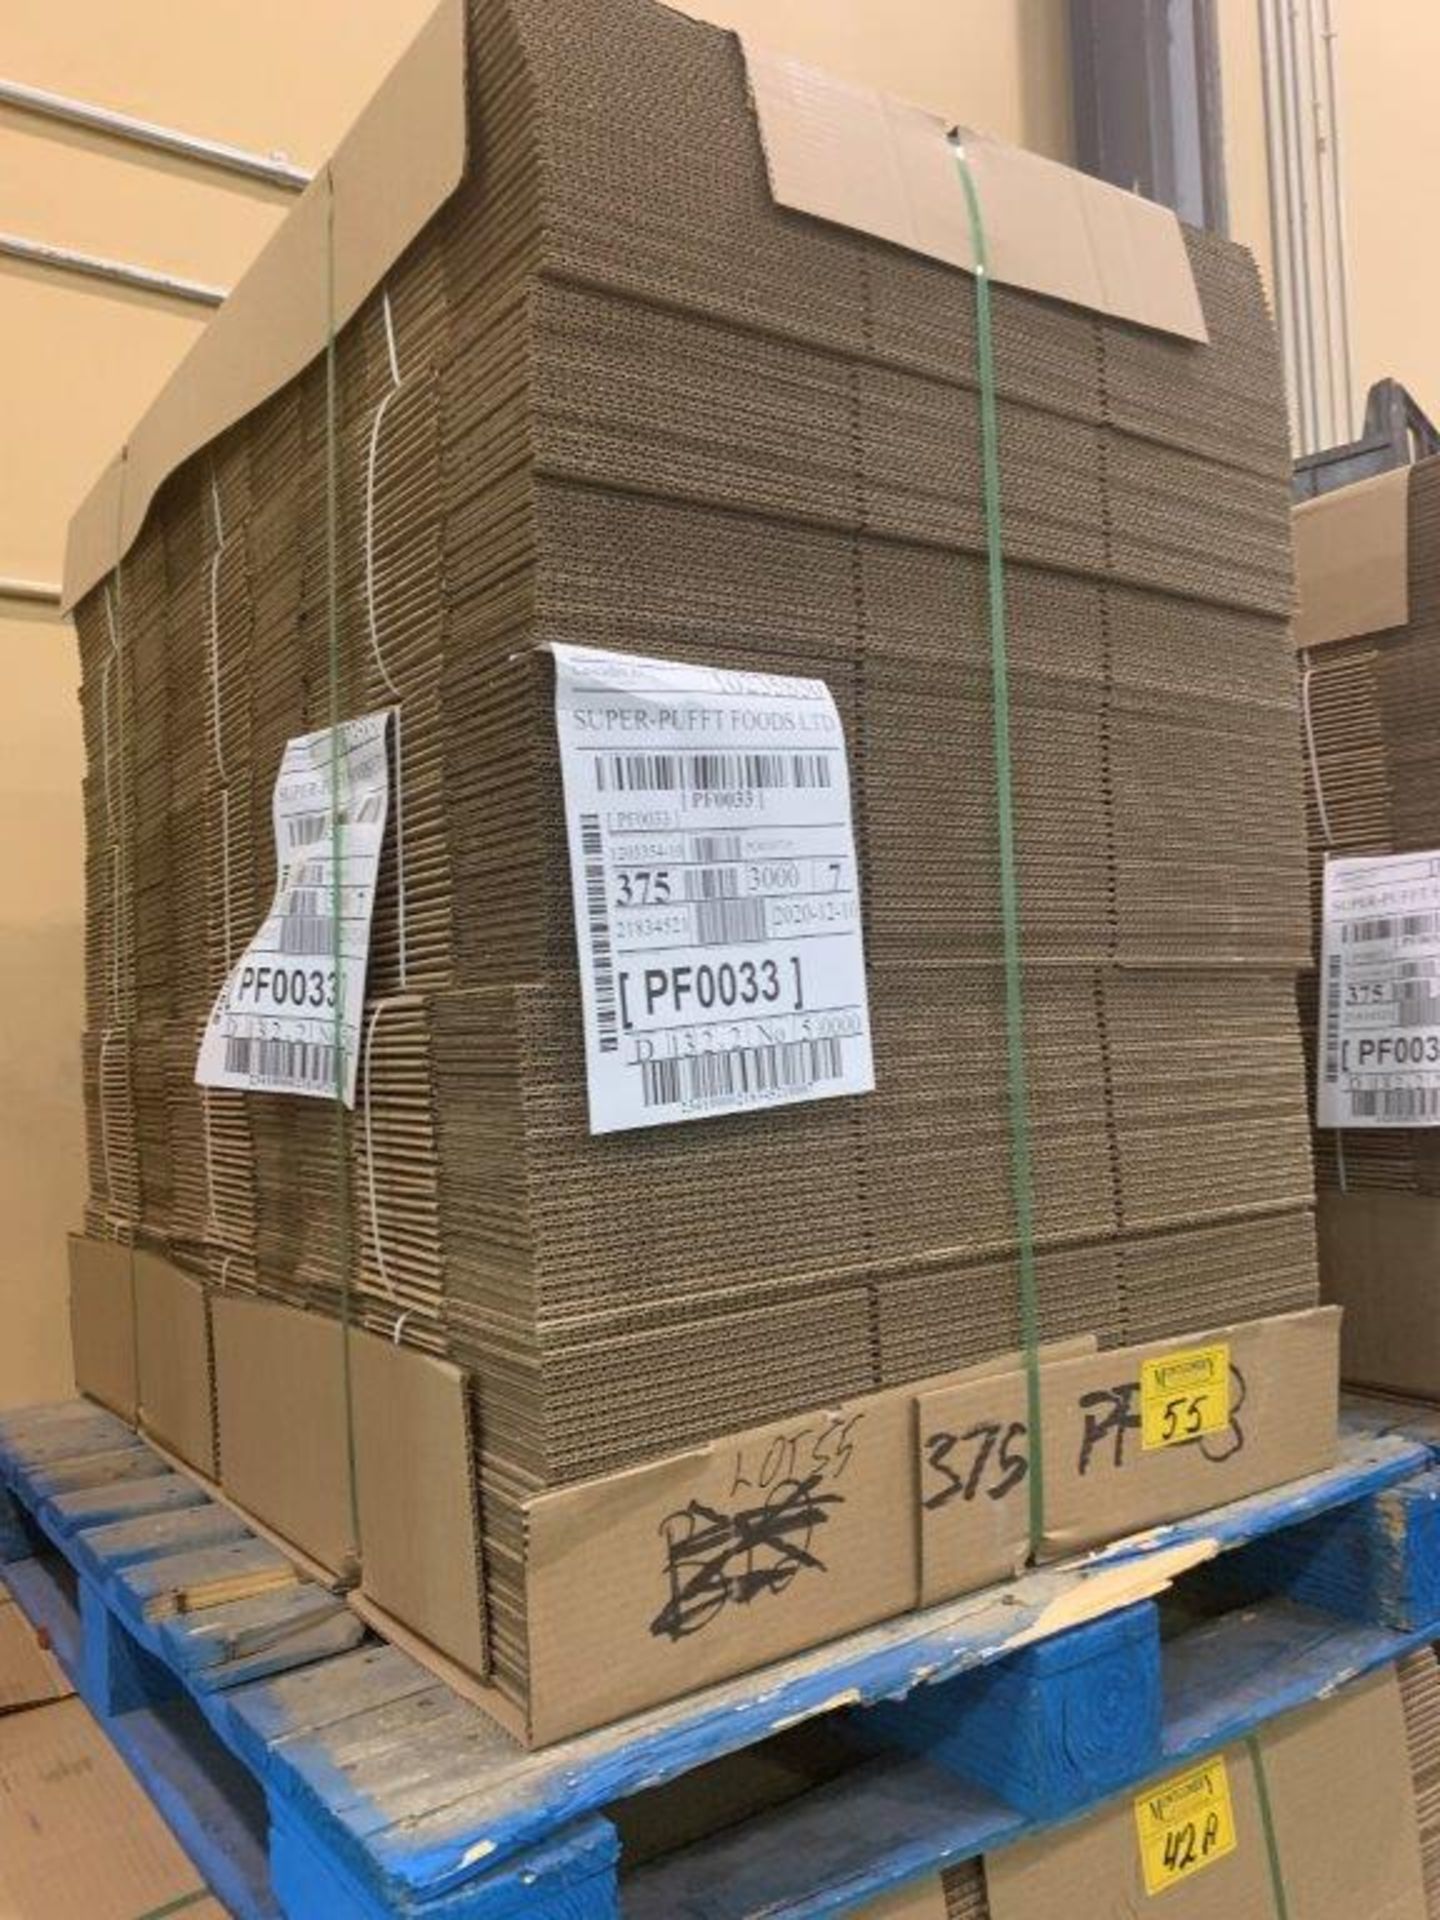 3-PALLETS PF0033 CORRIGATED CARDBOARD BOXES 375 X3 = 1125 BOXES APPROX 20X10X6 INCHES